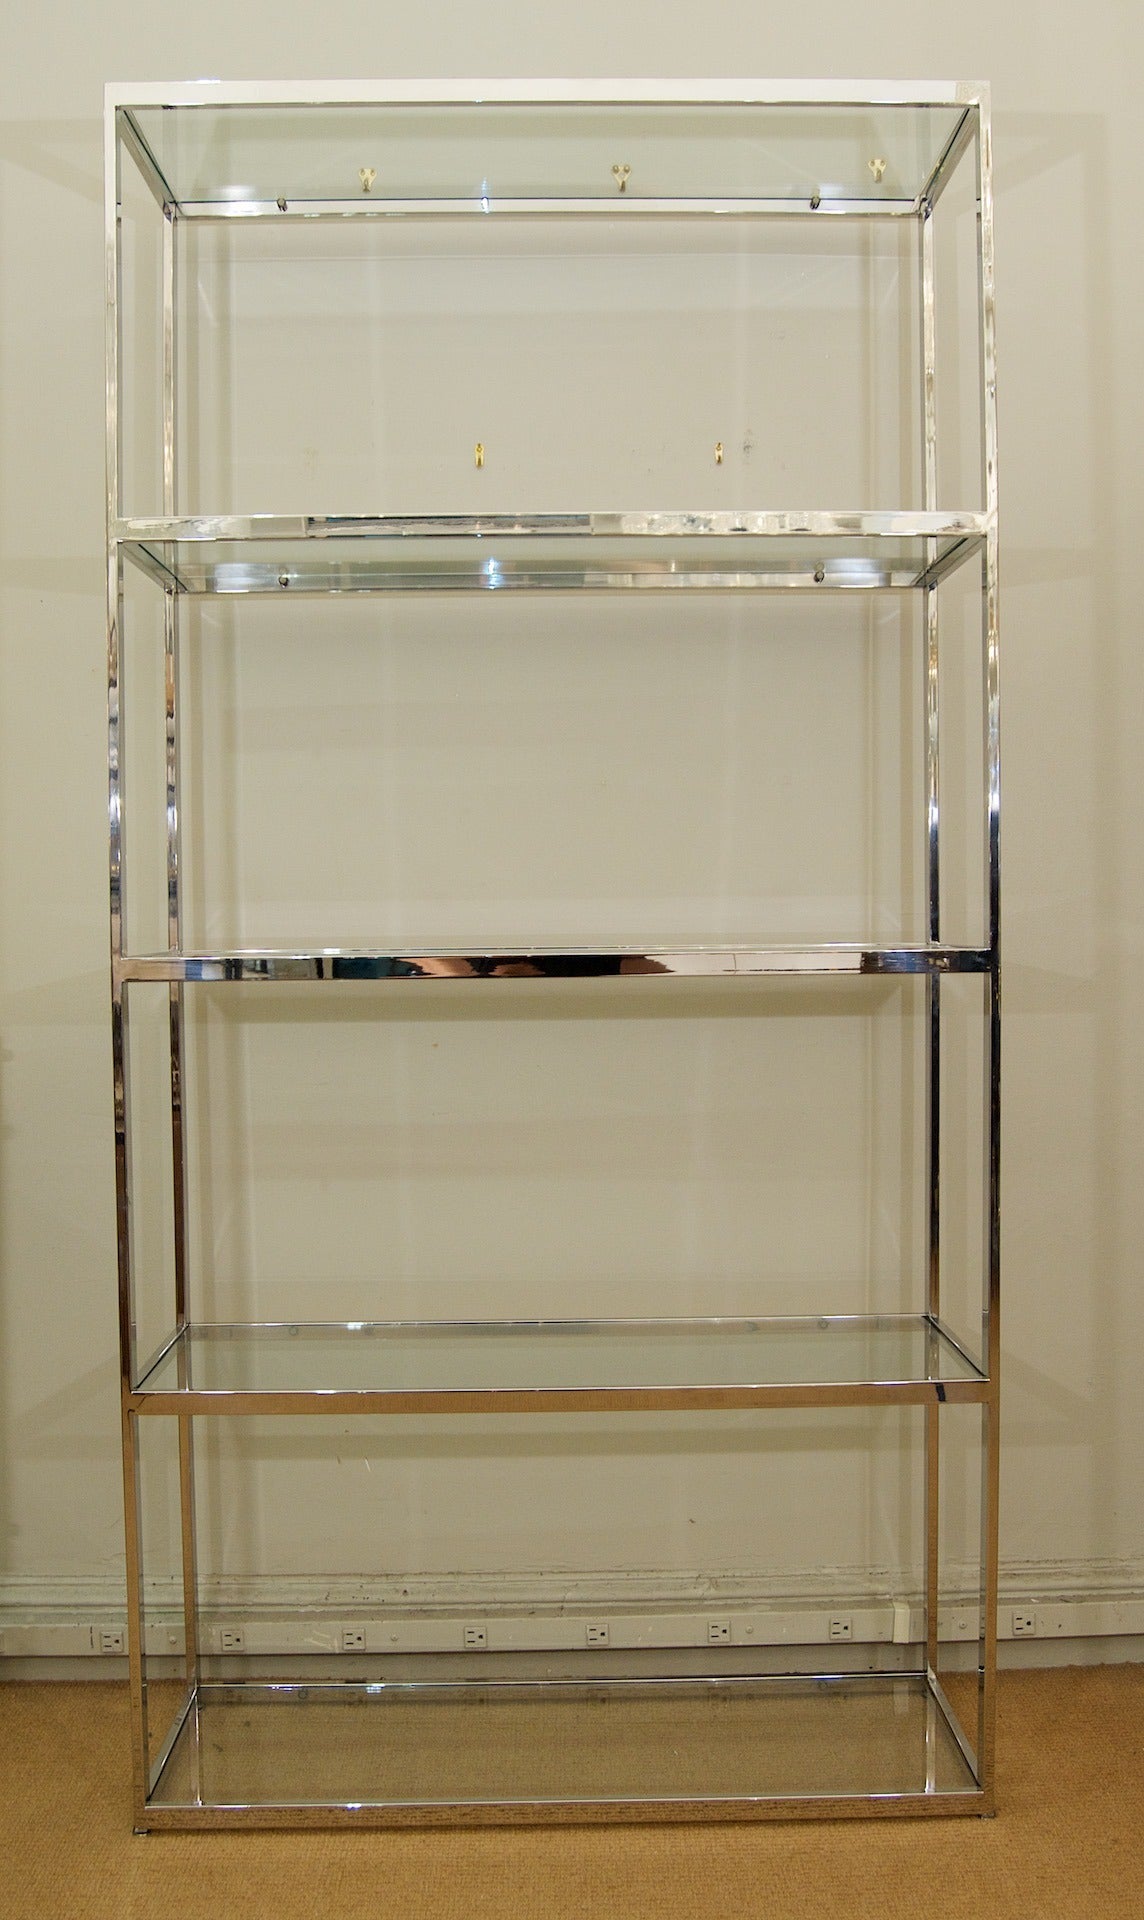 A five-glass shelved chrome etagere in the style of Milo Baughman boasts clean linear lines.